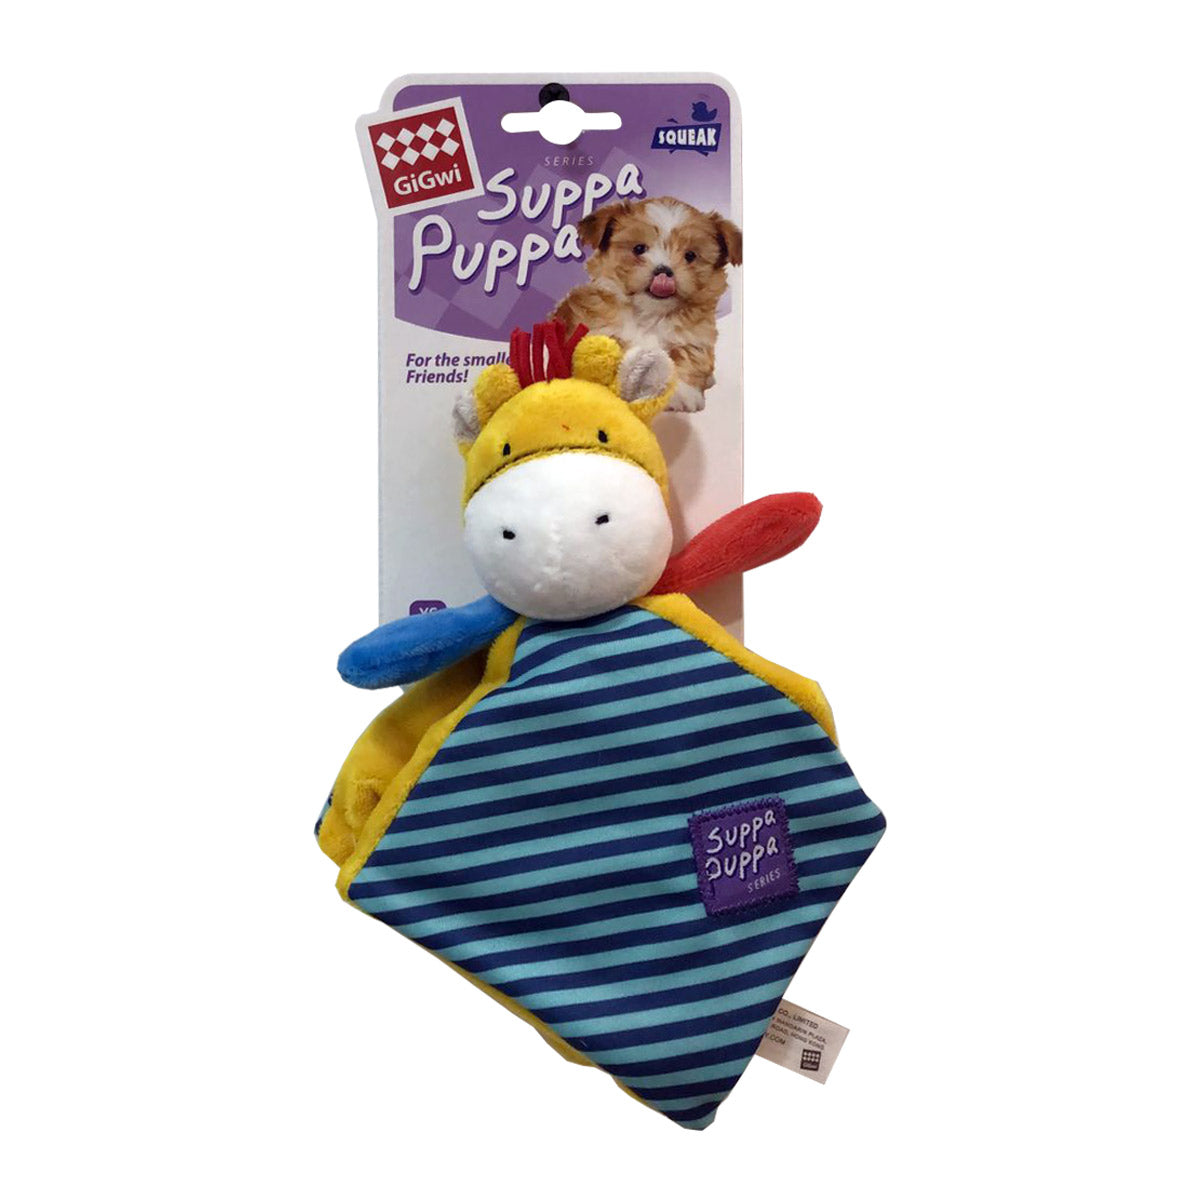 GIGWI Suppa Puppa Deer with Squeaker & Crinkle (Small)